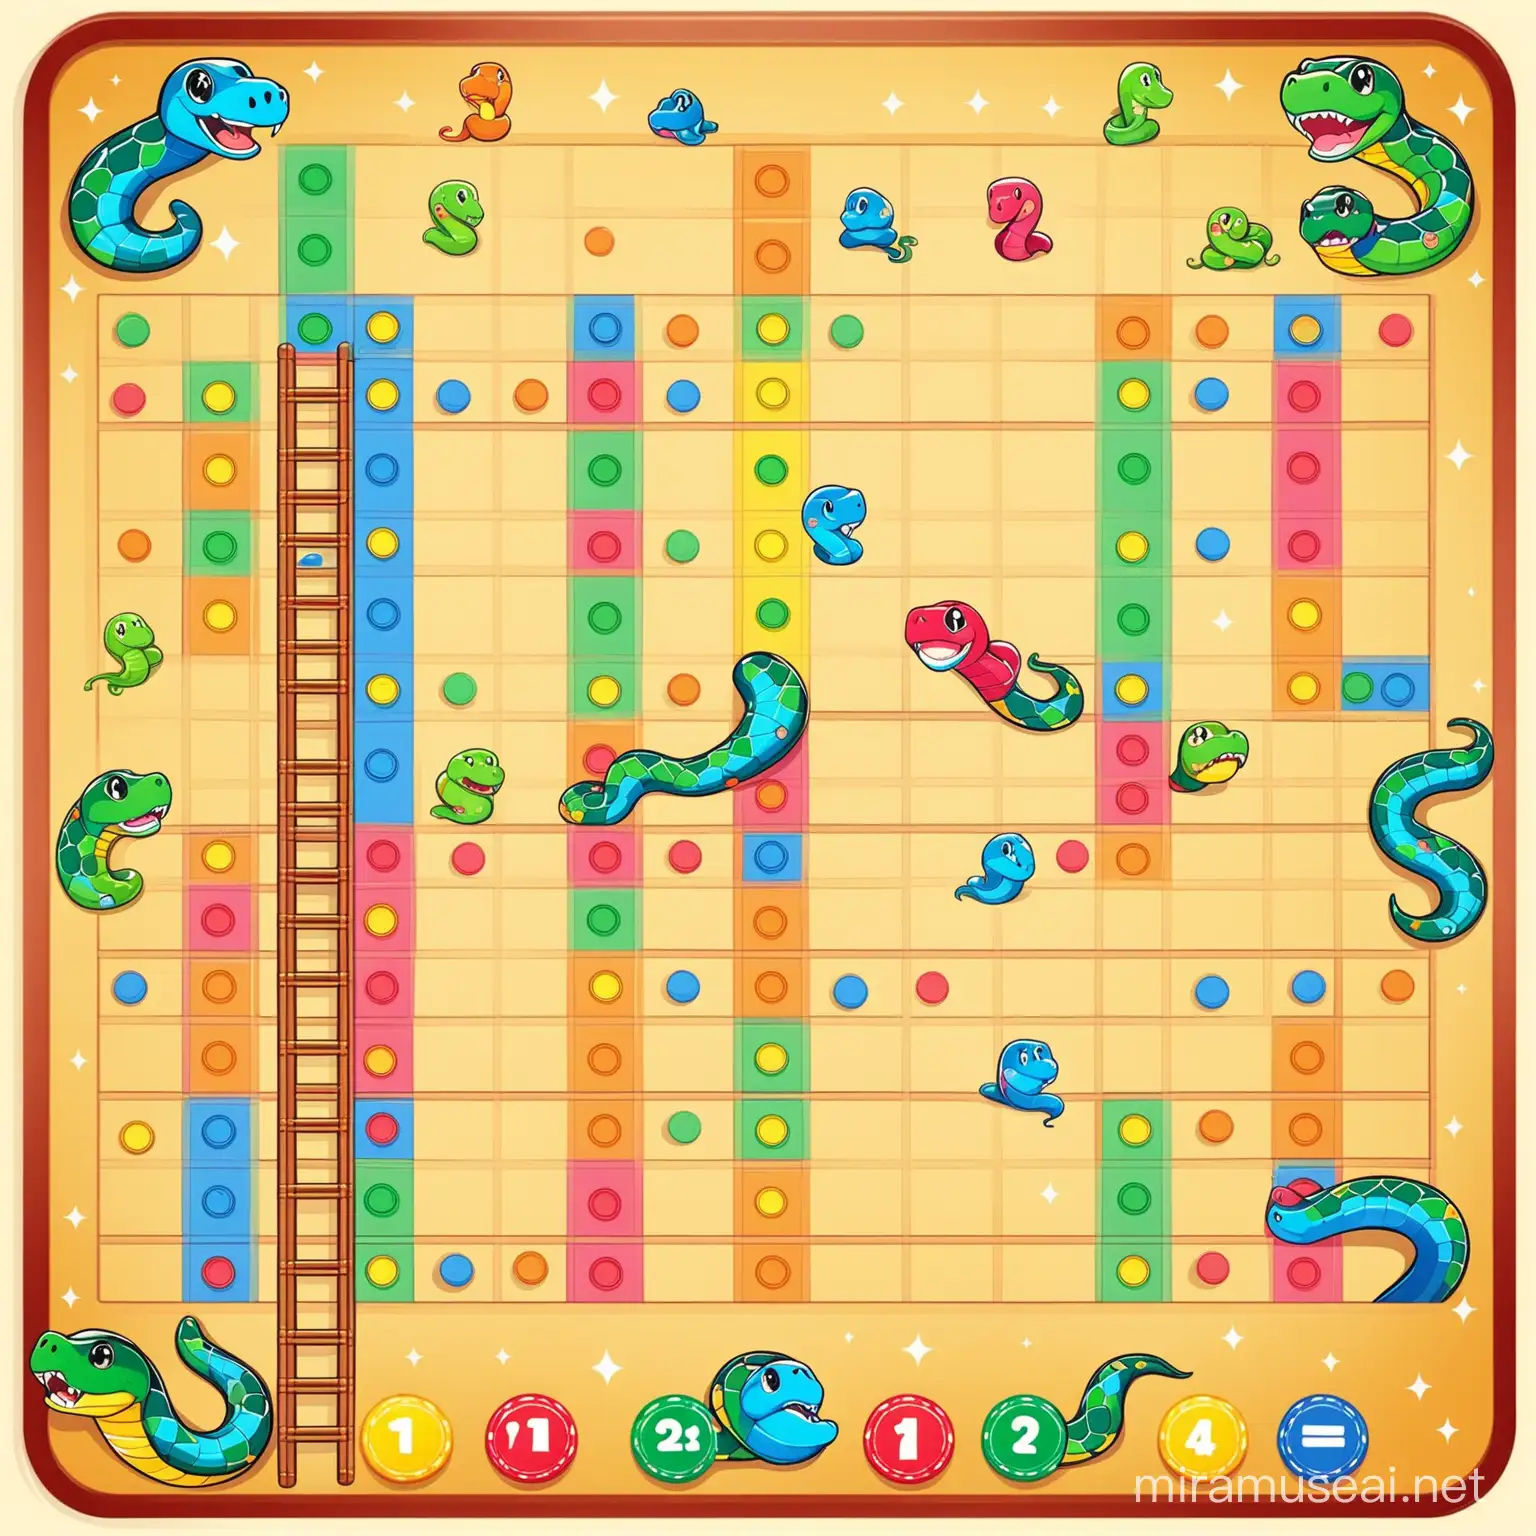 Exciting Colorful Board Game Adventure for Kids